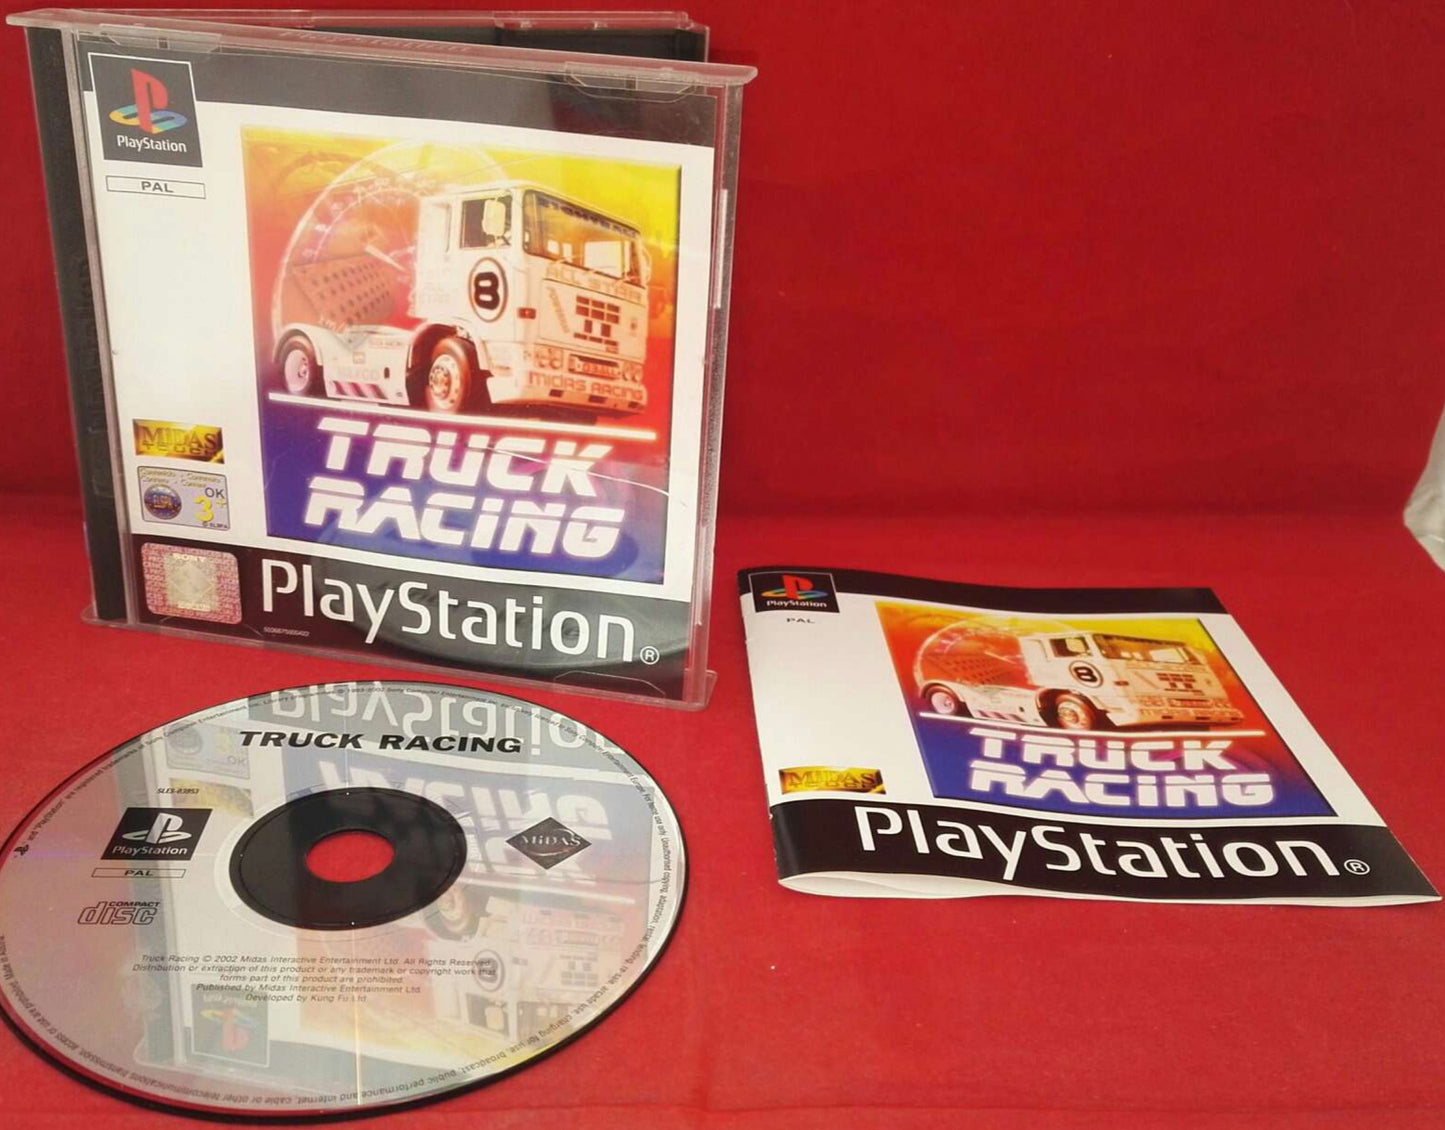 Truck Racing Sony Playstation 1 (PS1) Game